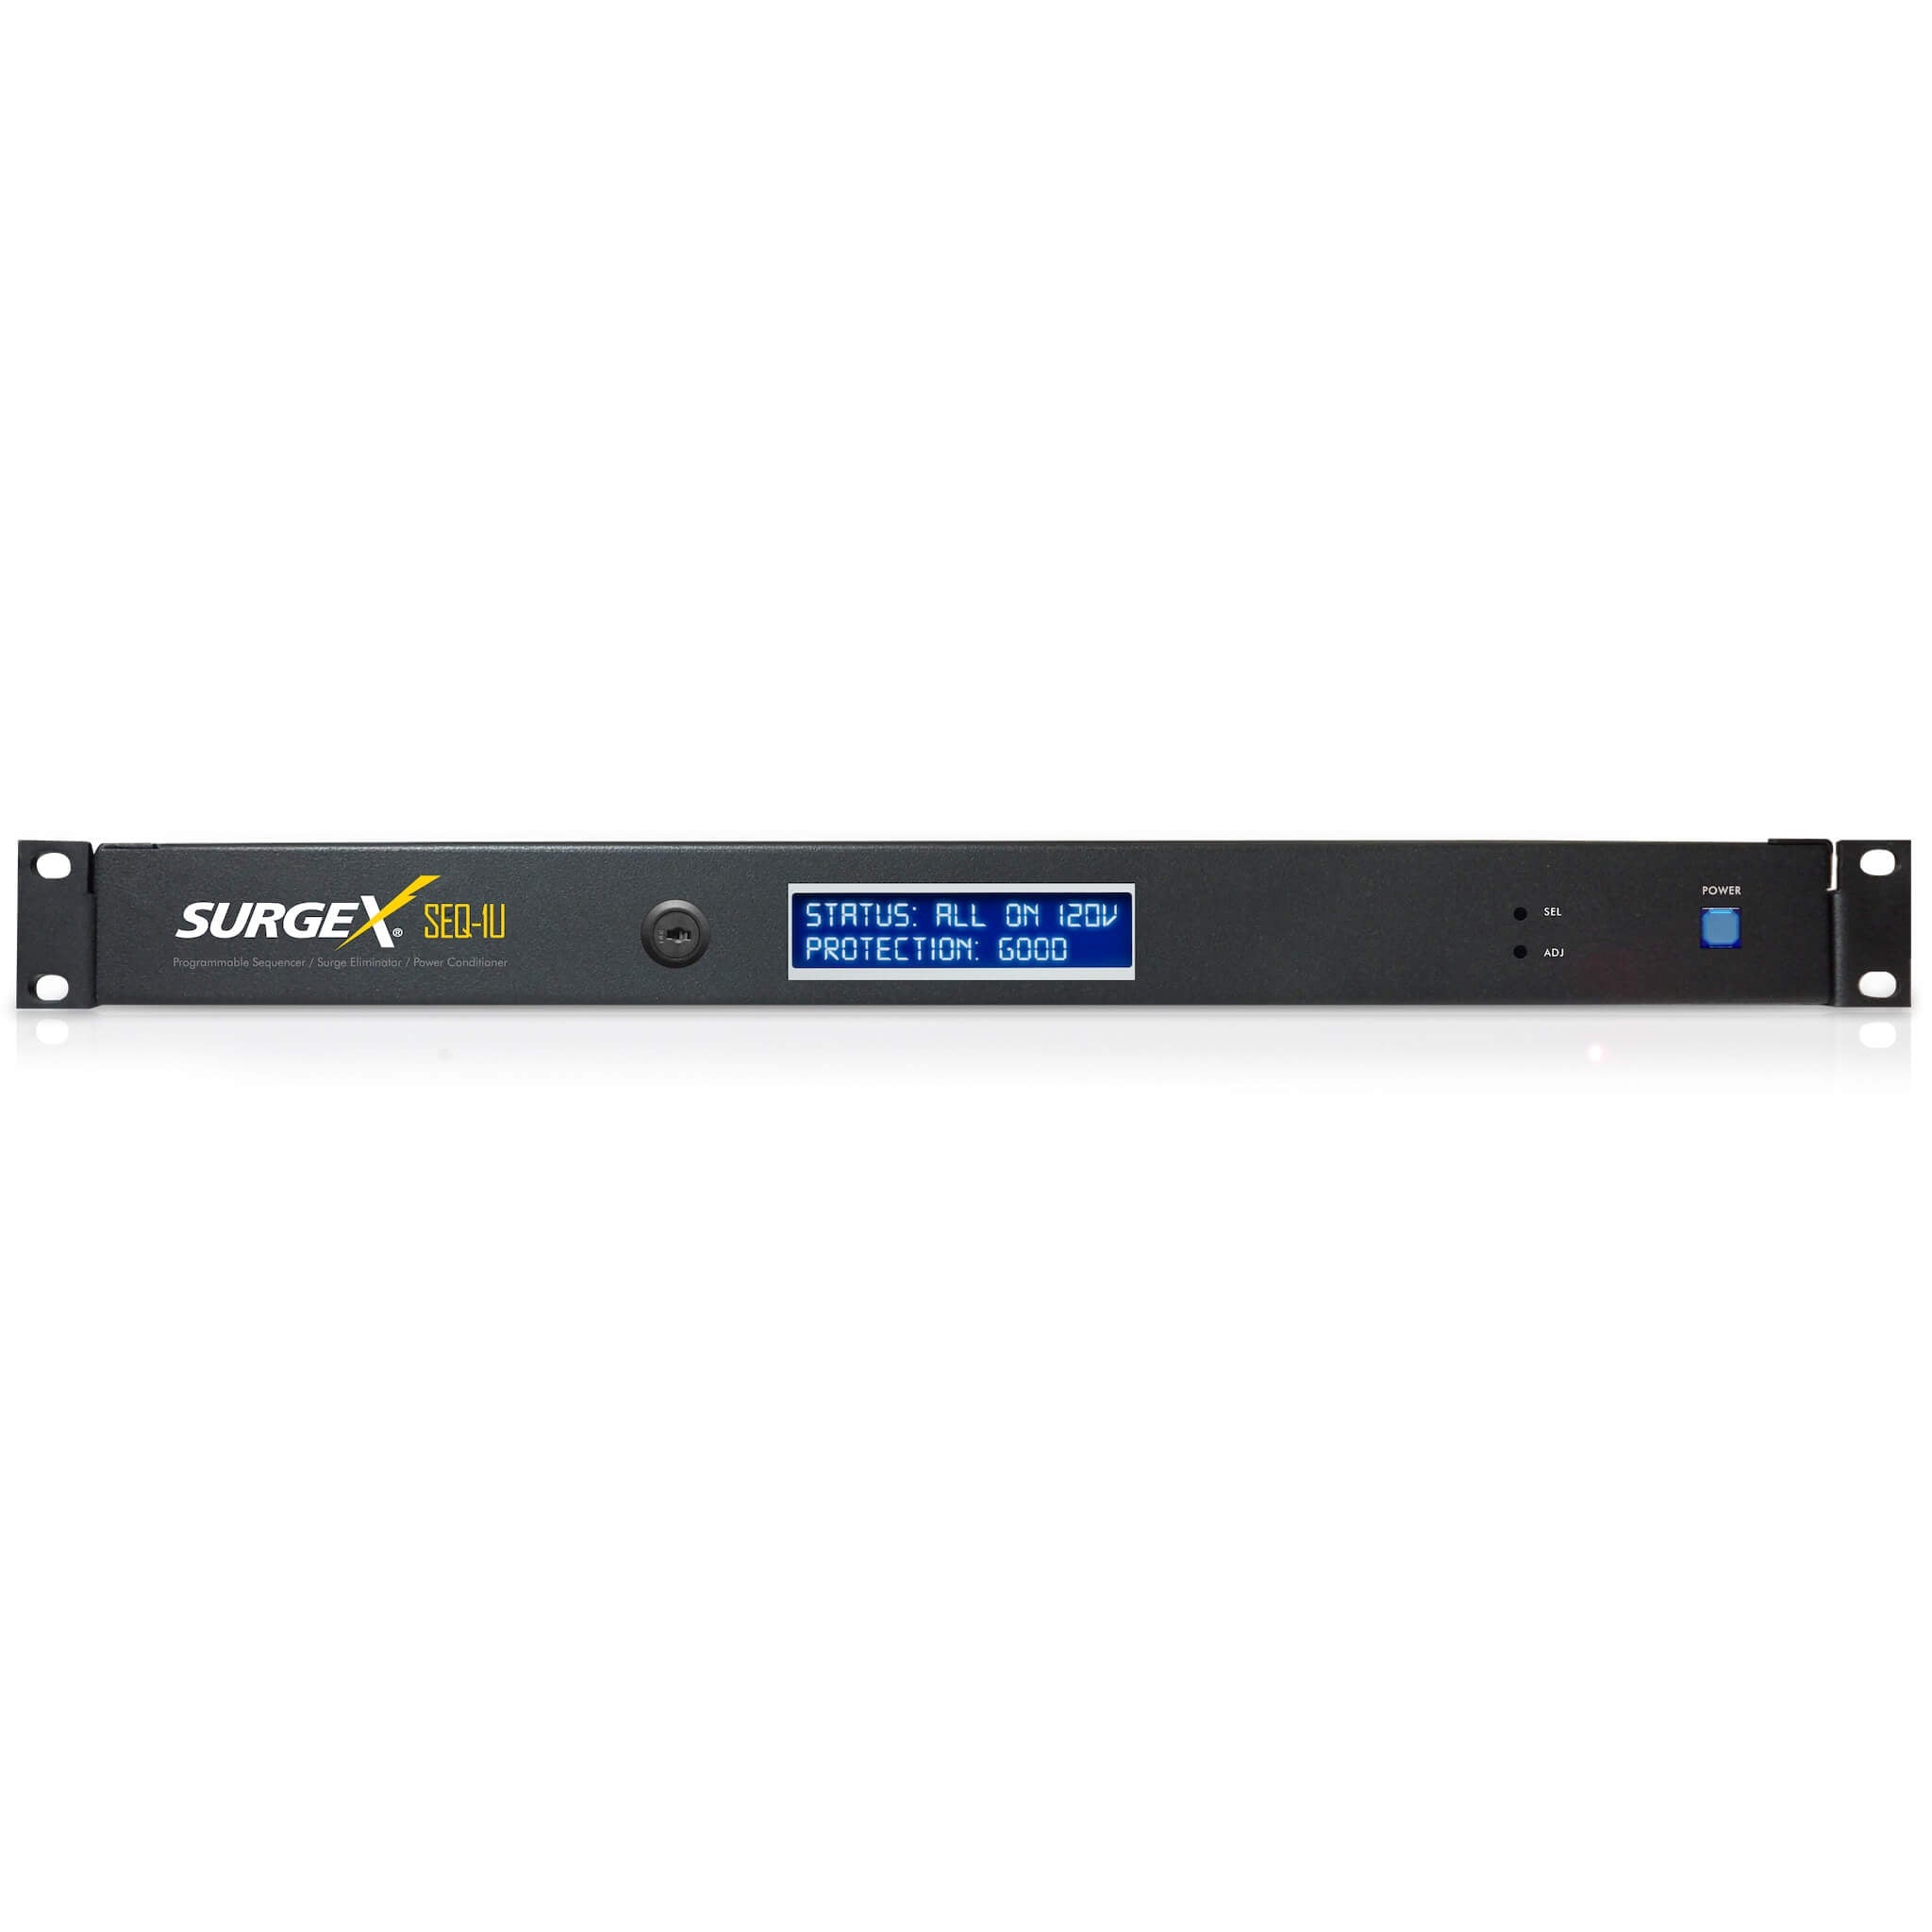 SurgeX SEQ-1U - Sequencing Surge Eliminator and Power Conditioner, front